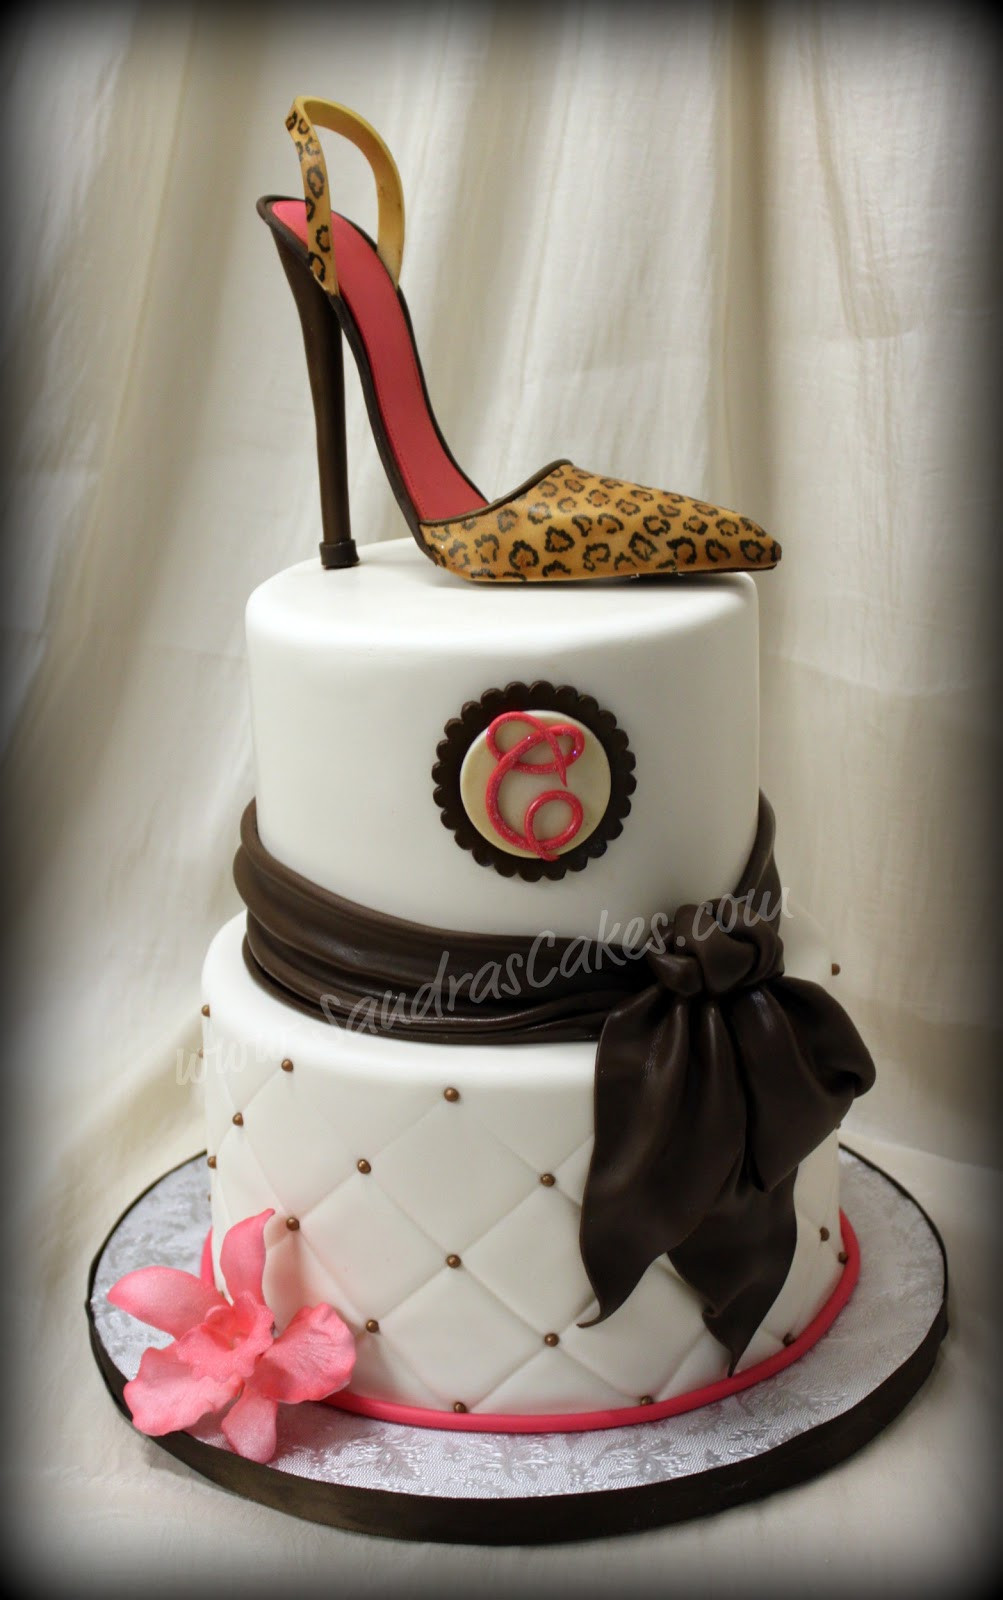 Birthday Cake Designs For Adults
 GROWN UP CAKES